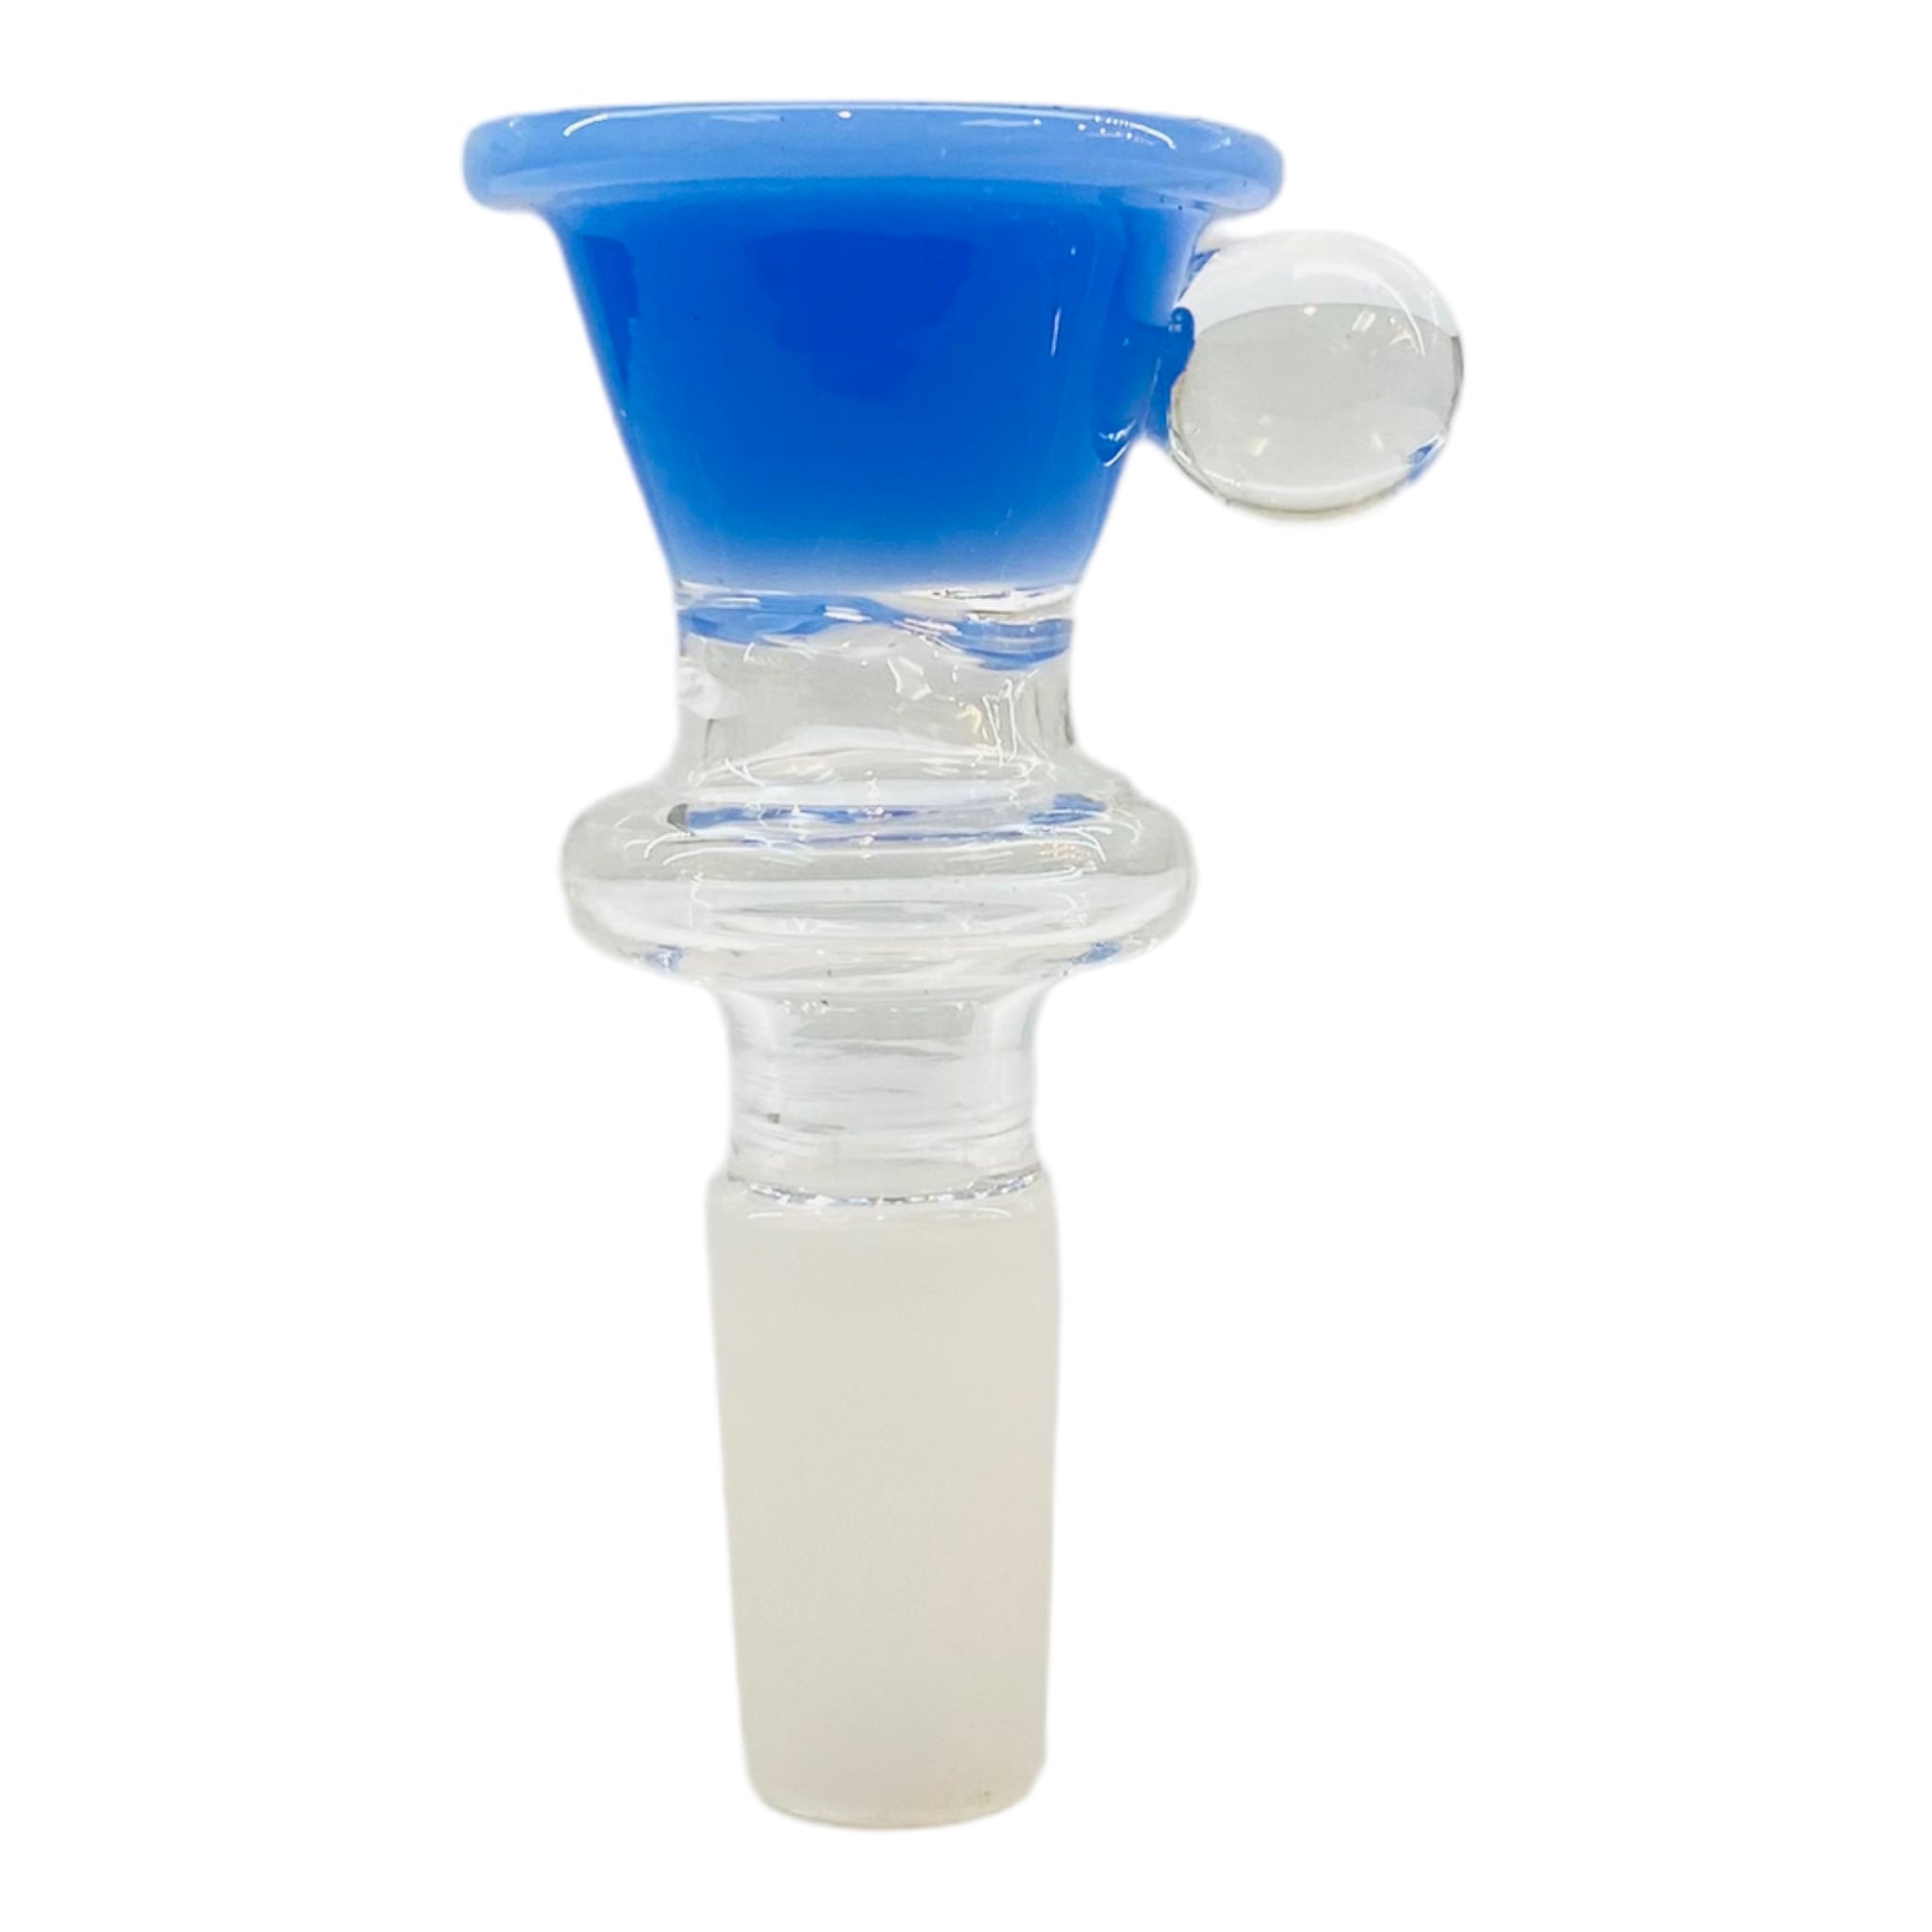 14mm Flower Bowl - Large Martini Funnel Bong Bowl Piece With Built In Screen - Baby Blue